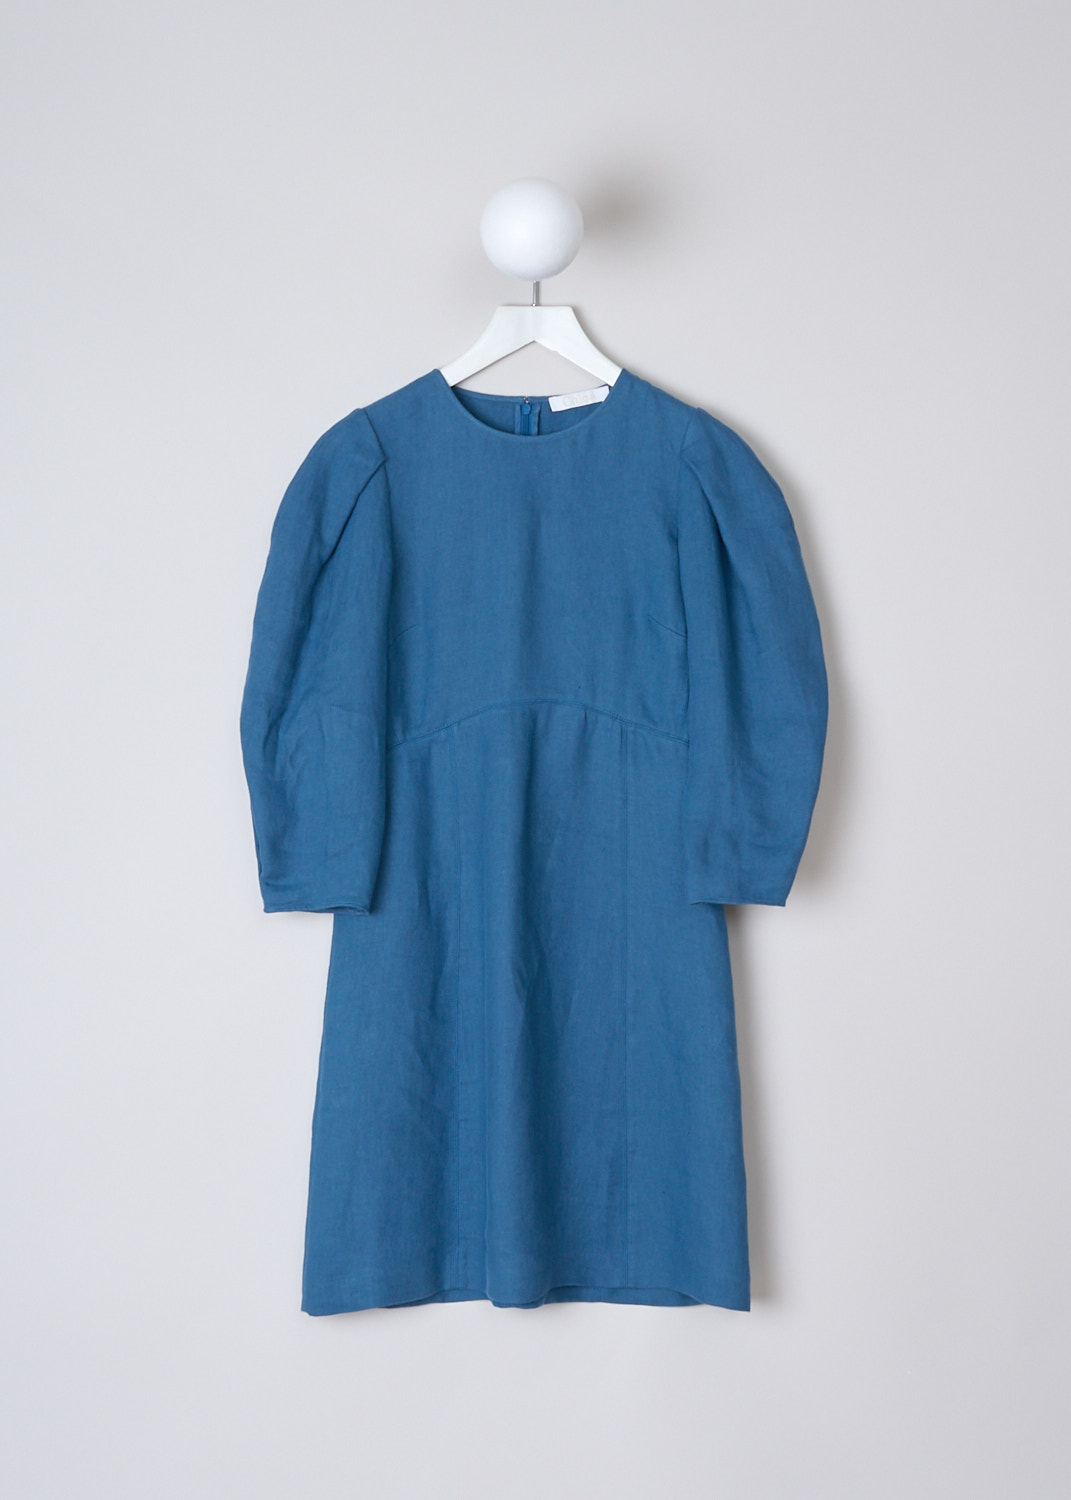 CHLOÉ, OPAL BLUE LINEN DRESS WITH BALLOON SLEEVES, CHC23URO3903144A_OPAL_BLUE, Blue, Front, This Opal Blue linen mini dress has a round neckline. The dress has  three-quarter balloon sleeves with straight endings. The dress has a slight A-line silhouette. In the back, a concealed centre hook and zip function as the closure. 

